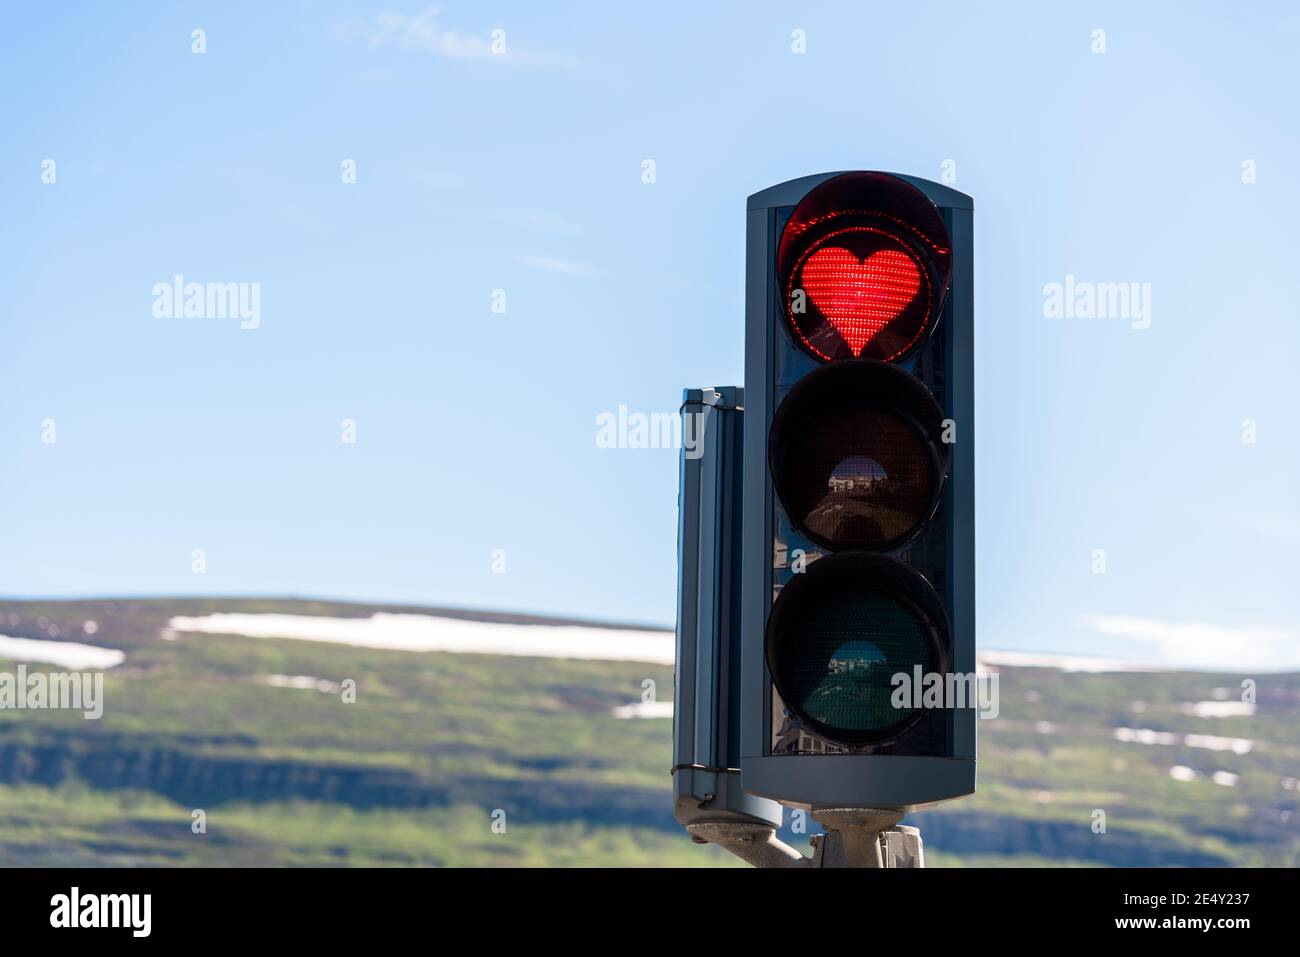 Traffic lights with a red heart-shaped signal Stock Photo